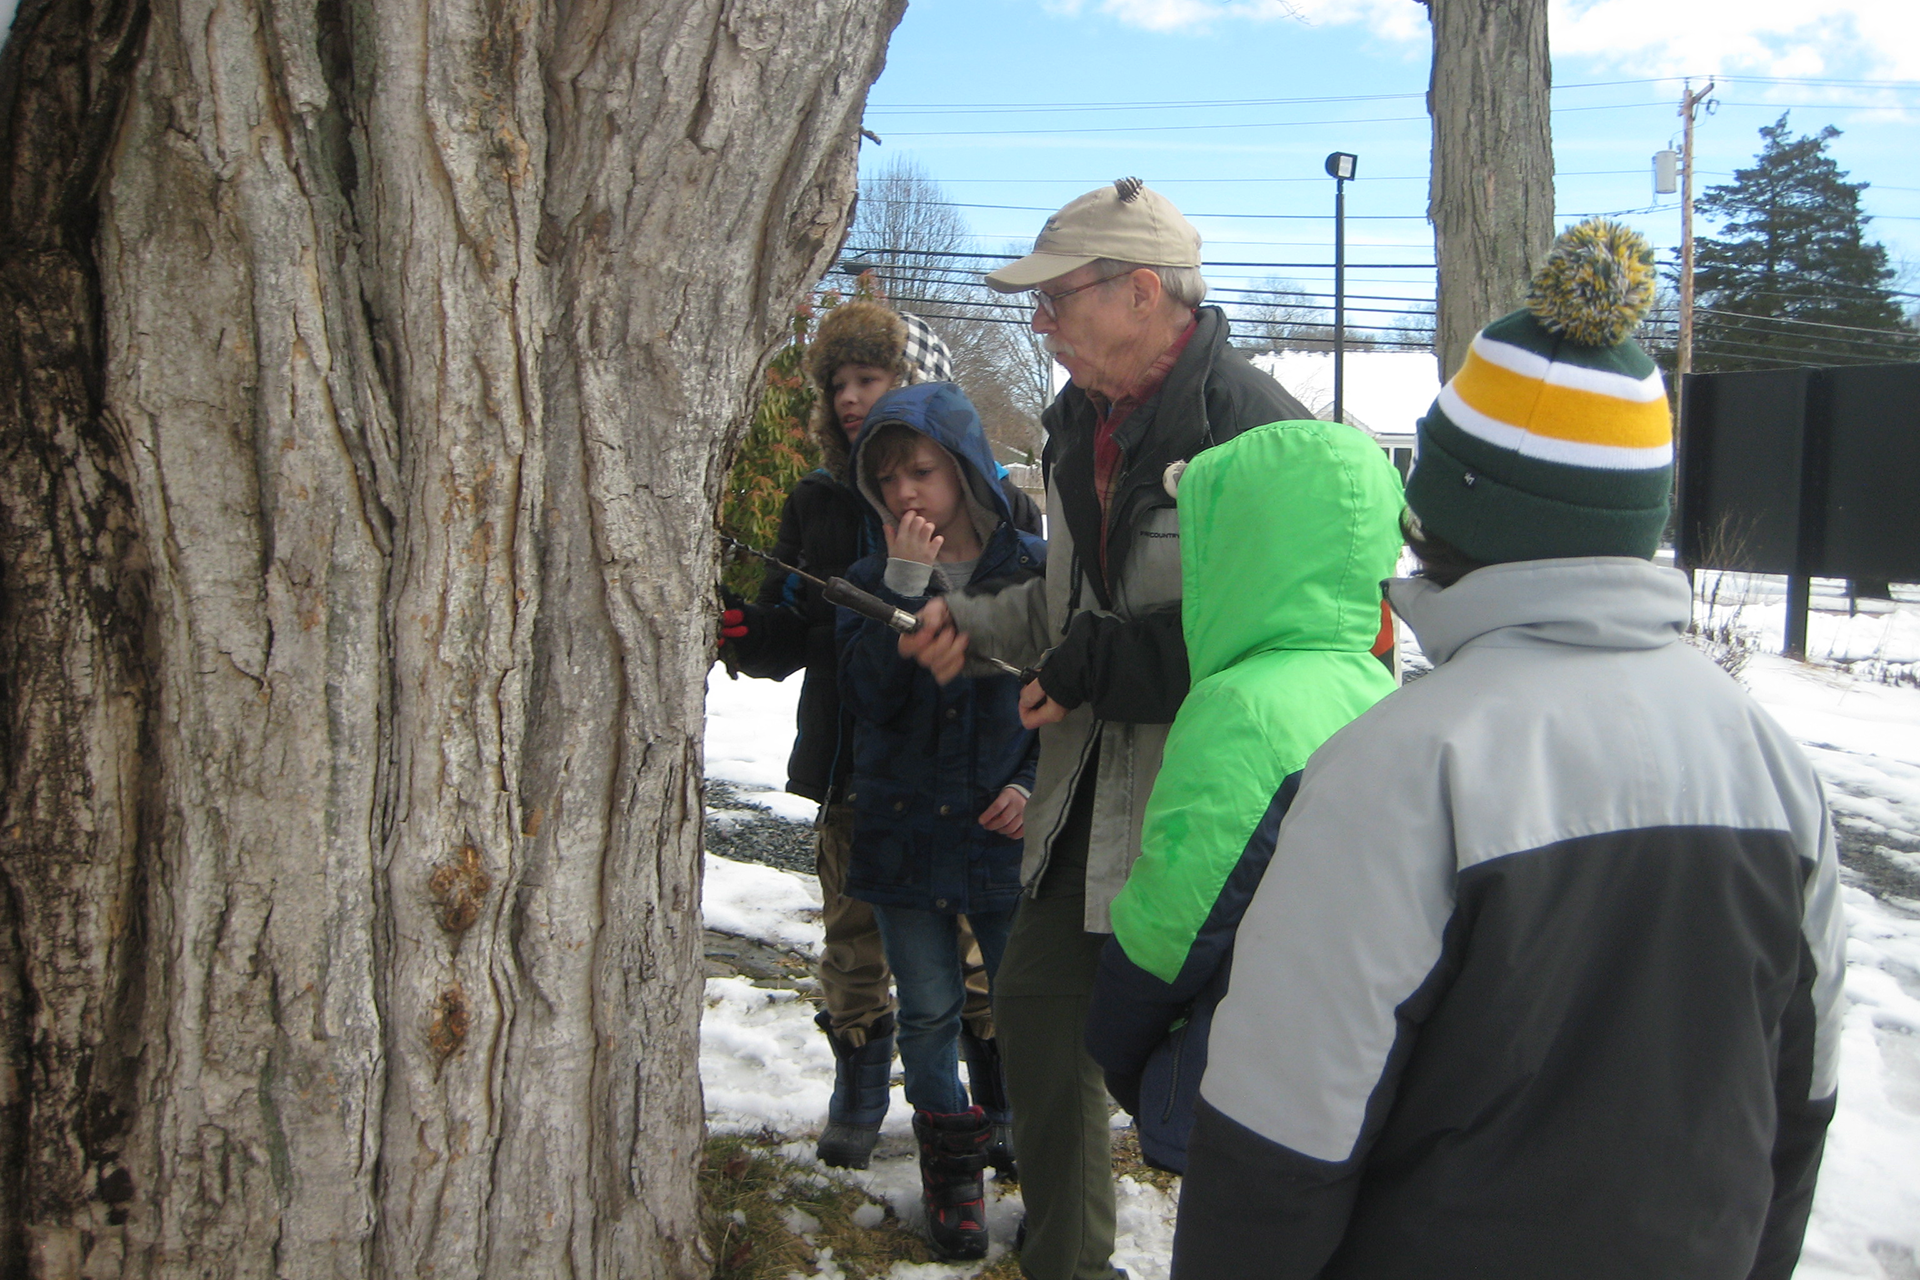 Man with white hair and brown mustache taps into a tree with several young boys around him.